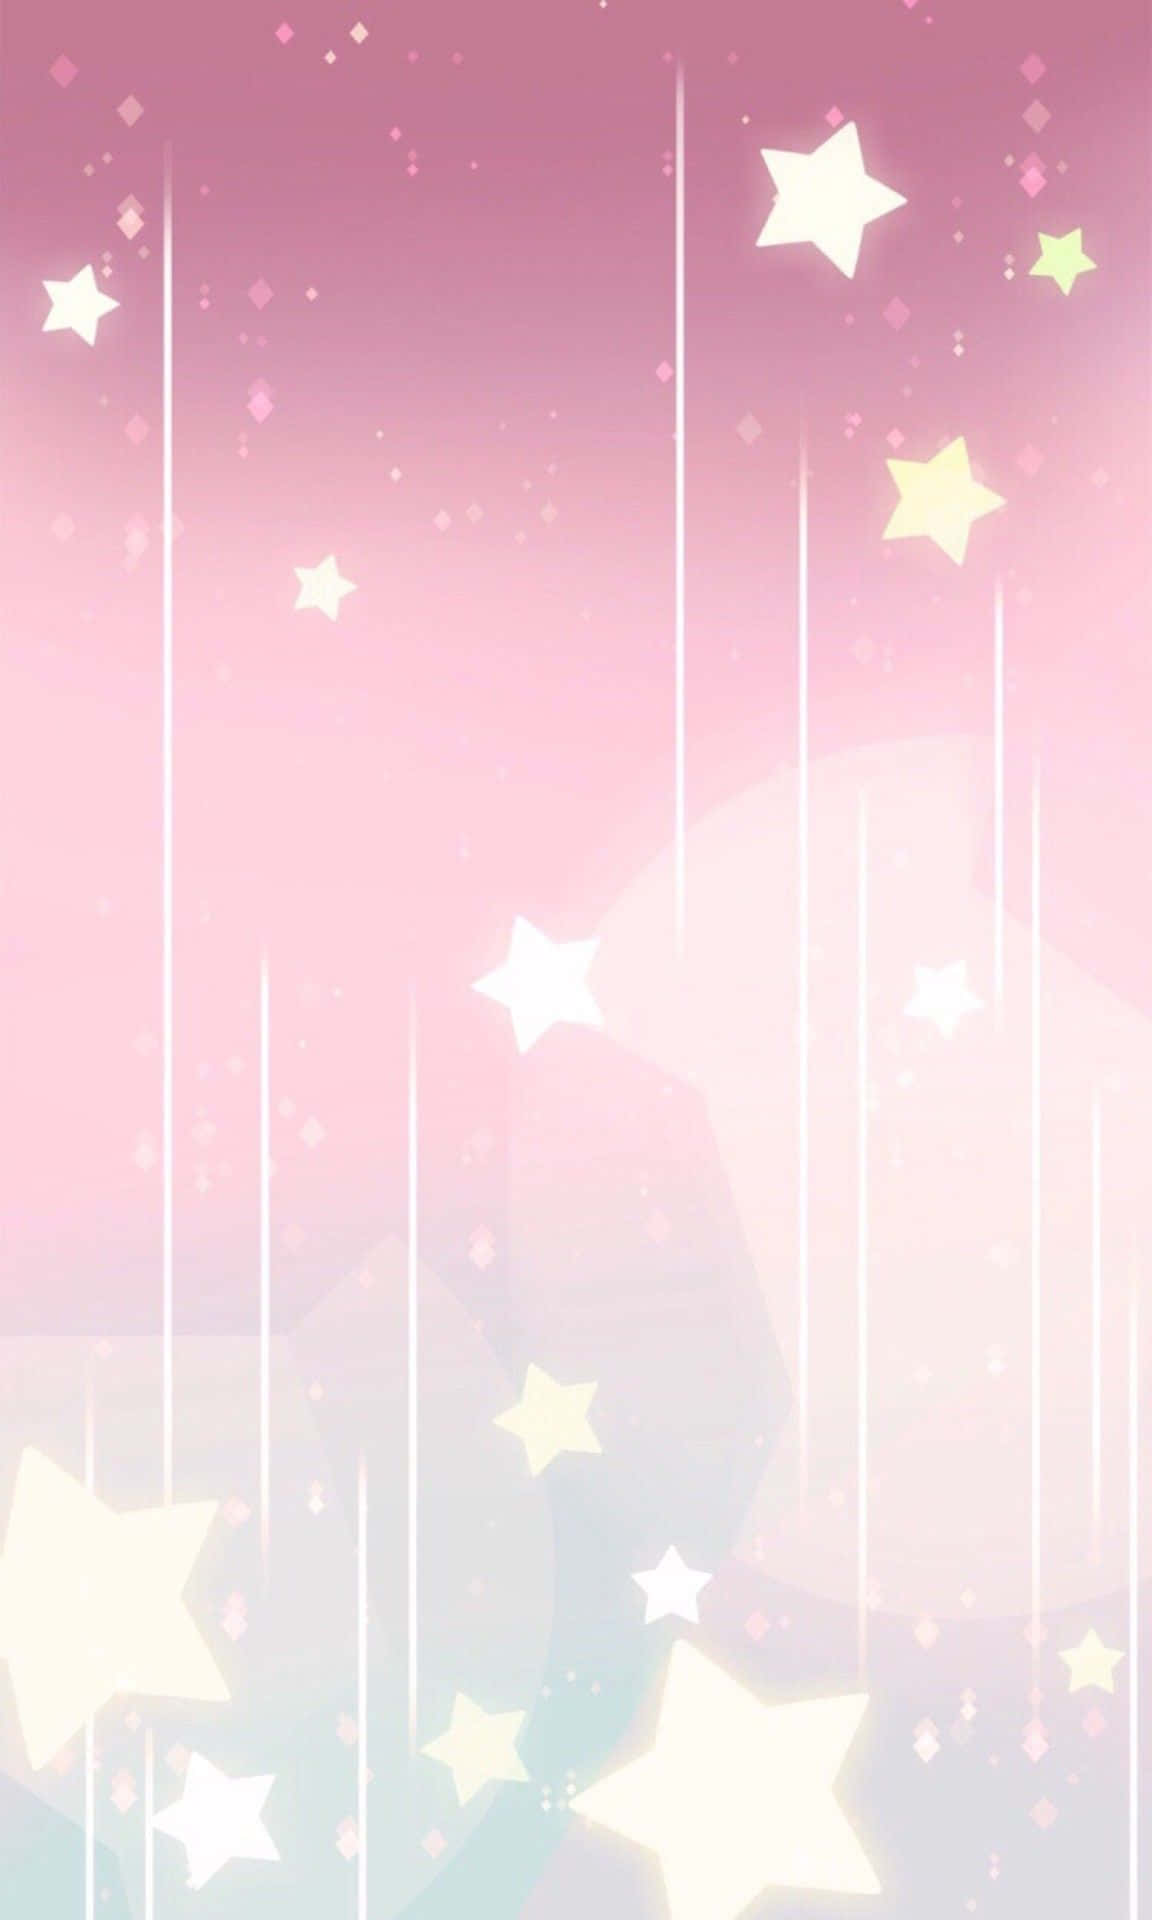 A Pink Background With Stars And Clouds